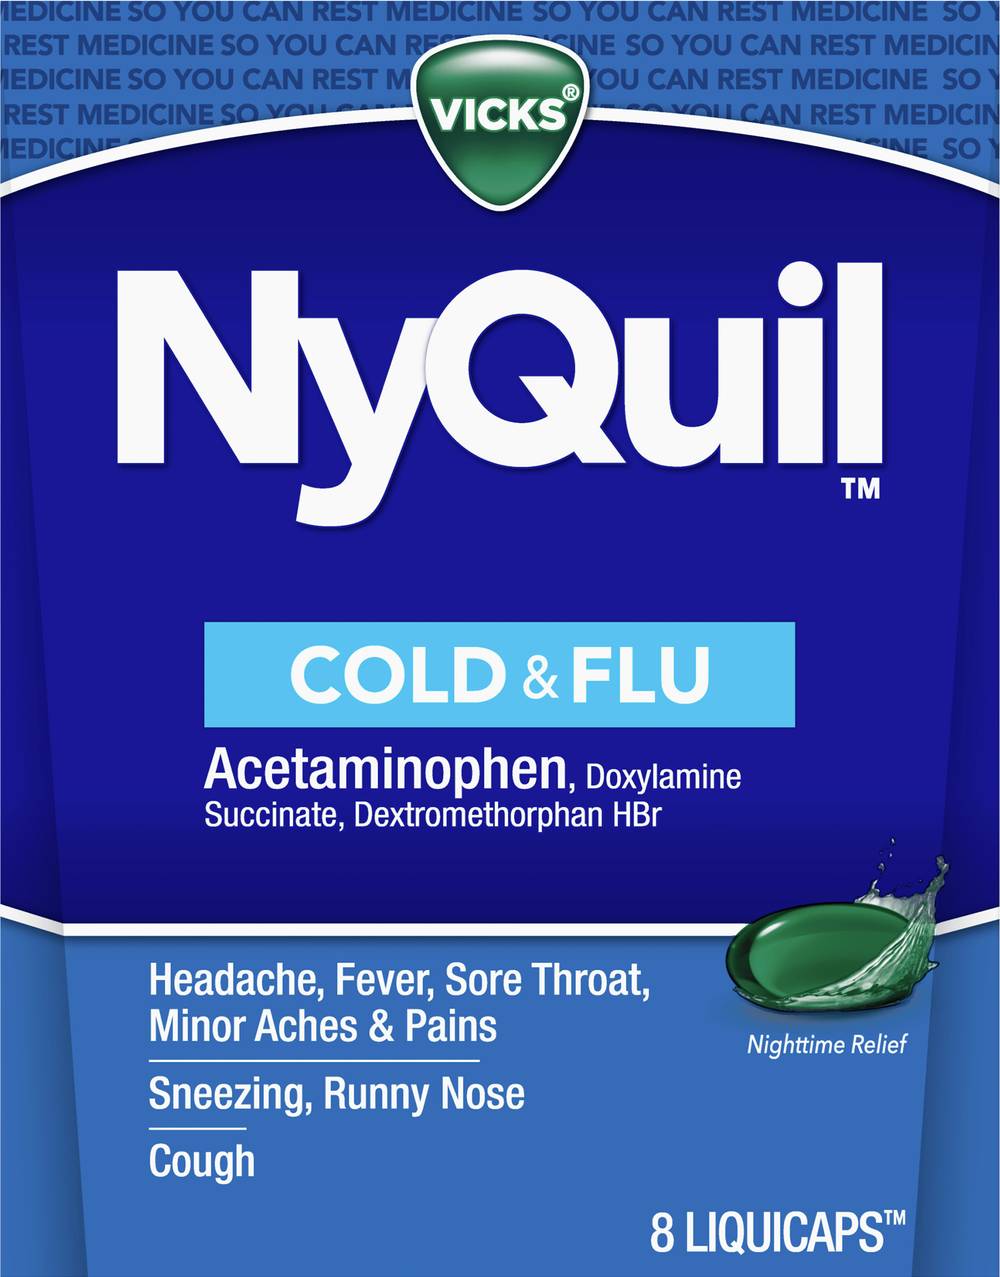 Vicks Nyquil Cold and Flu Relief Liquid Medicine (8 ct)